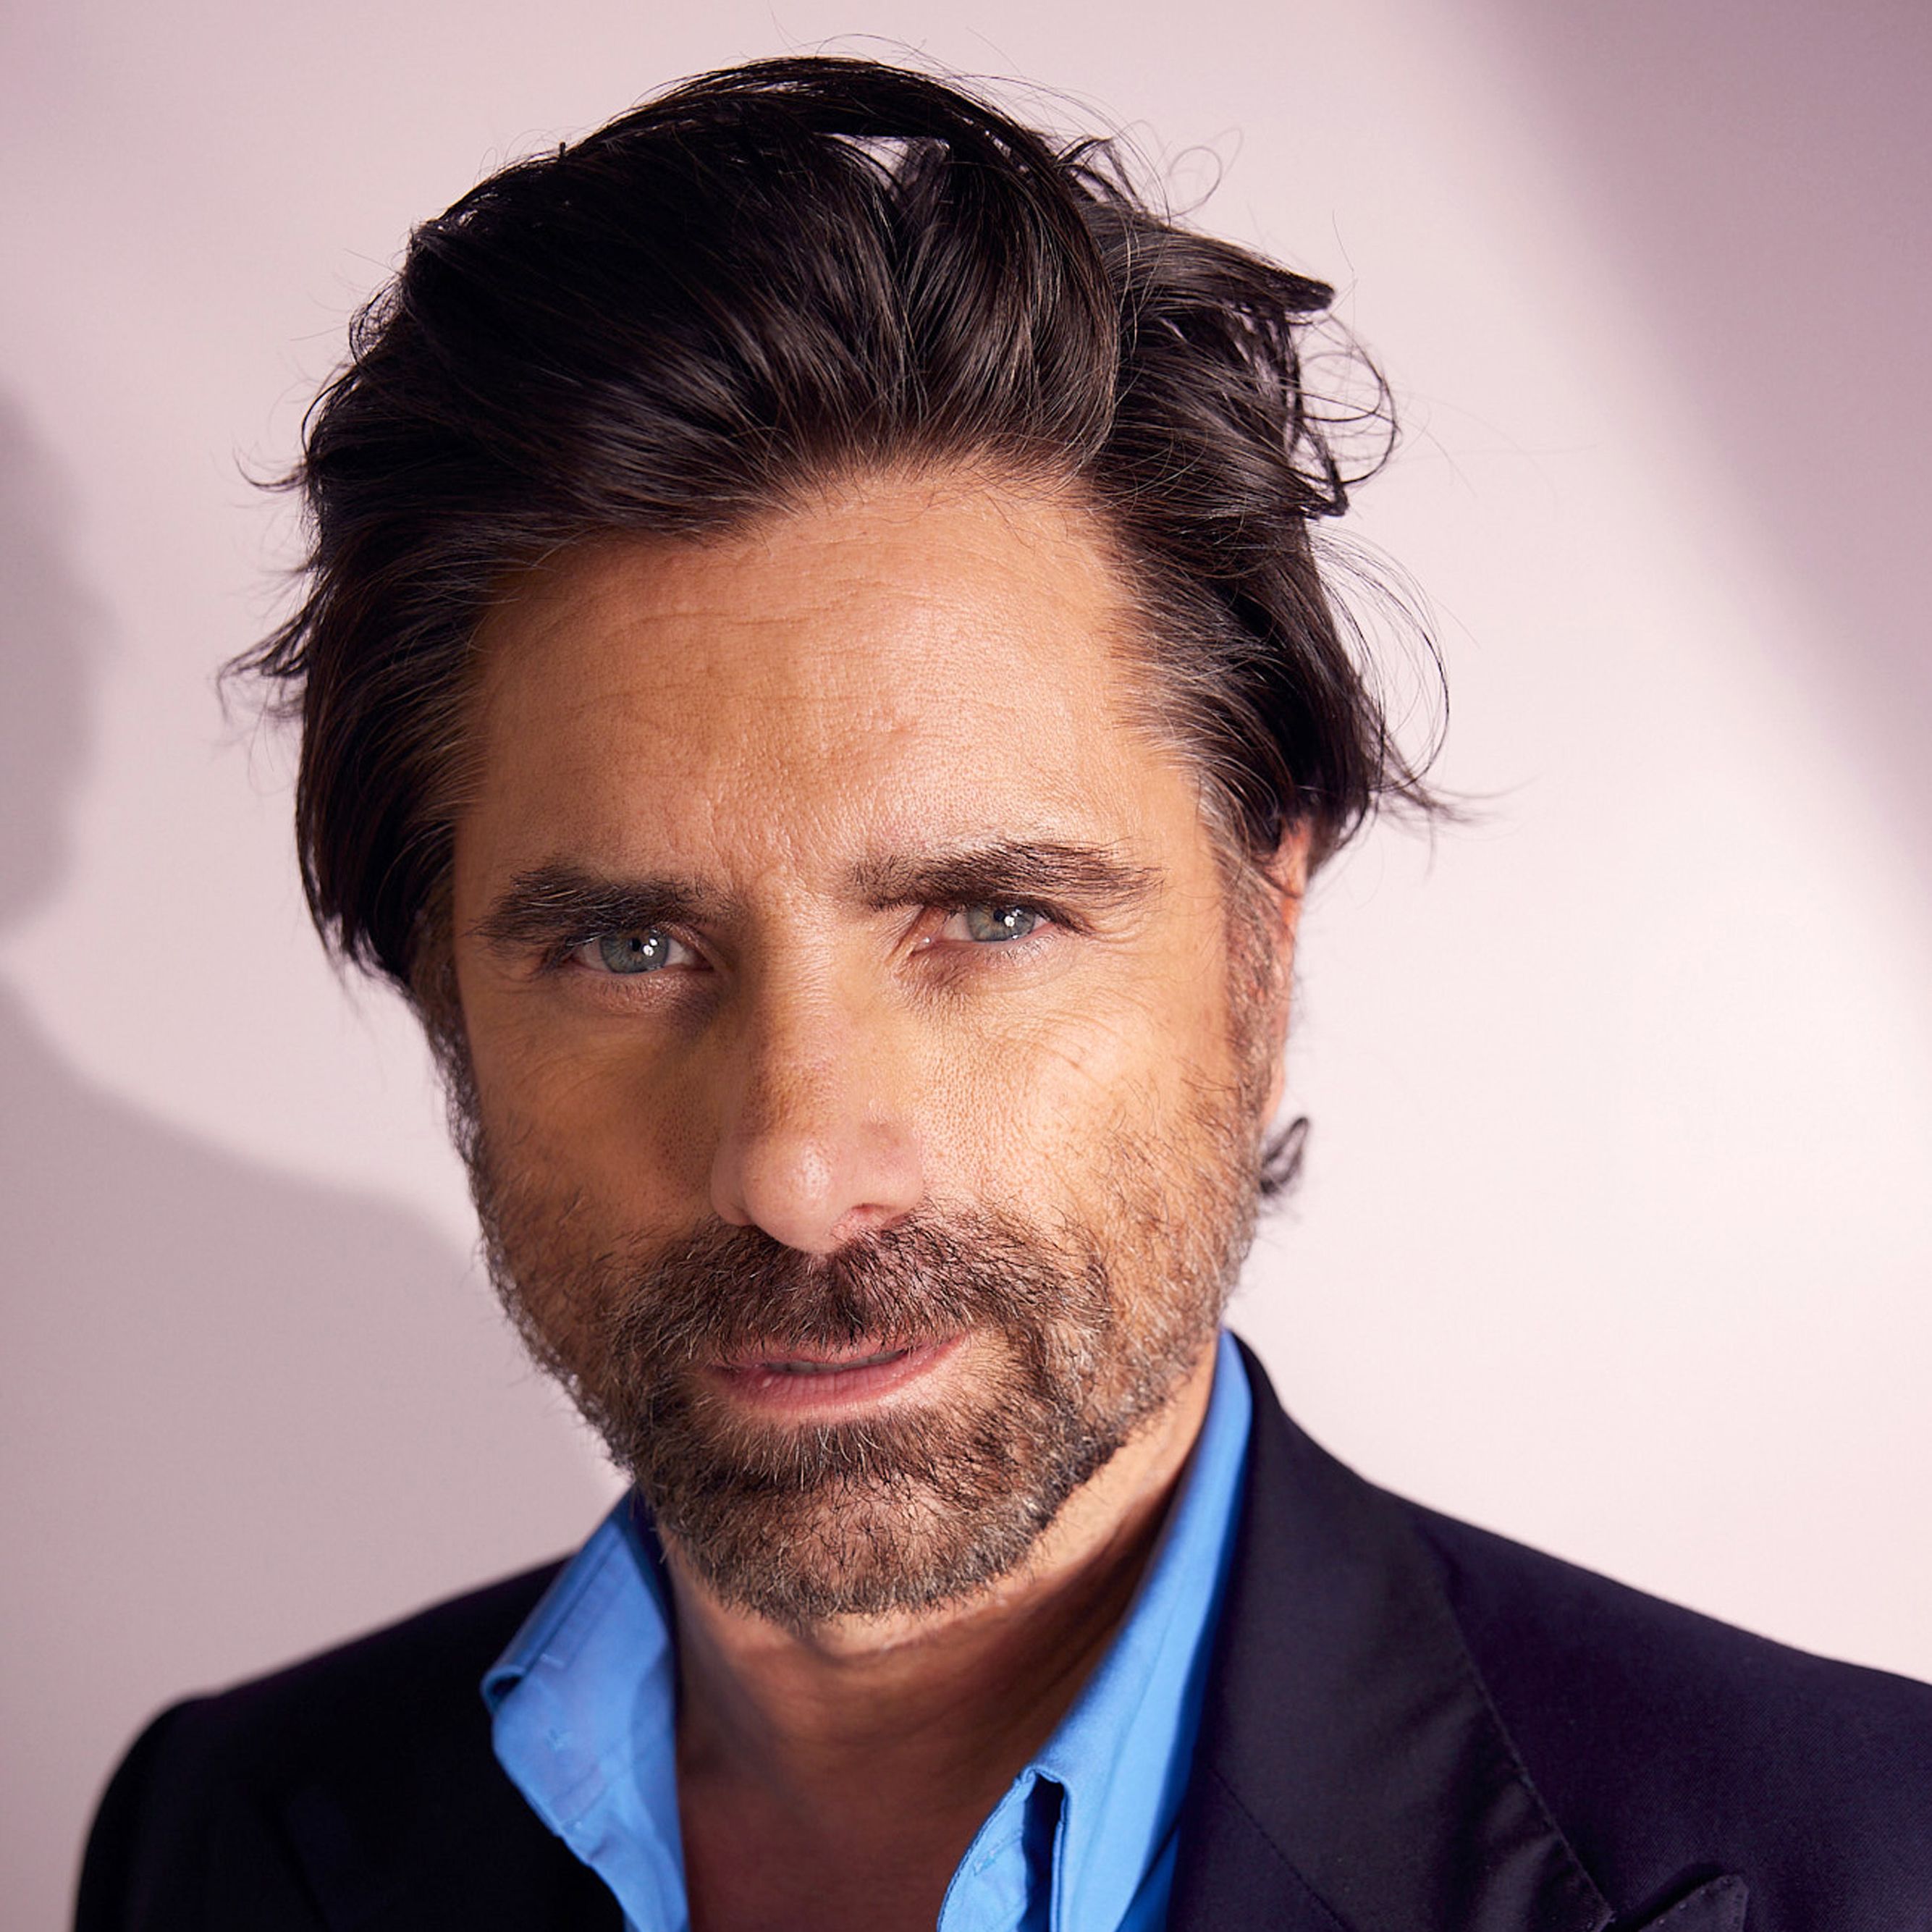 Celebs who slept with common people - john stamos